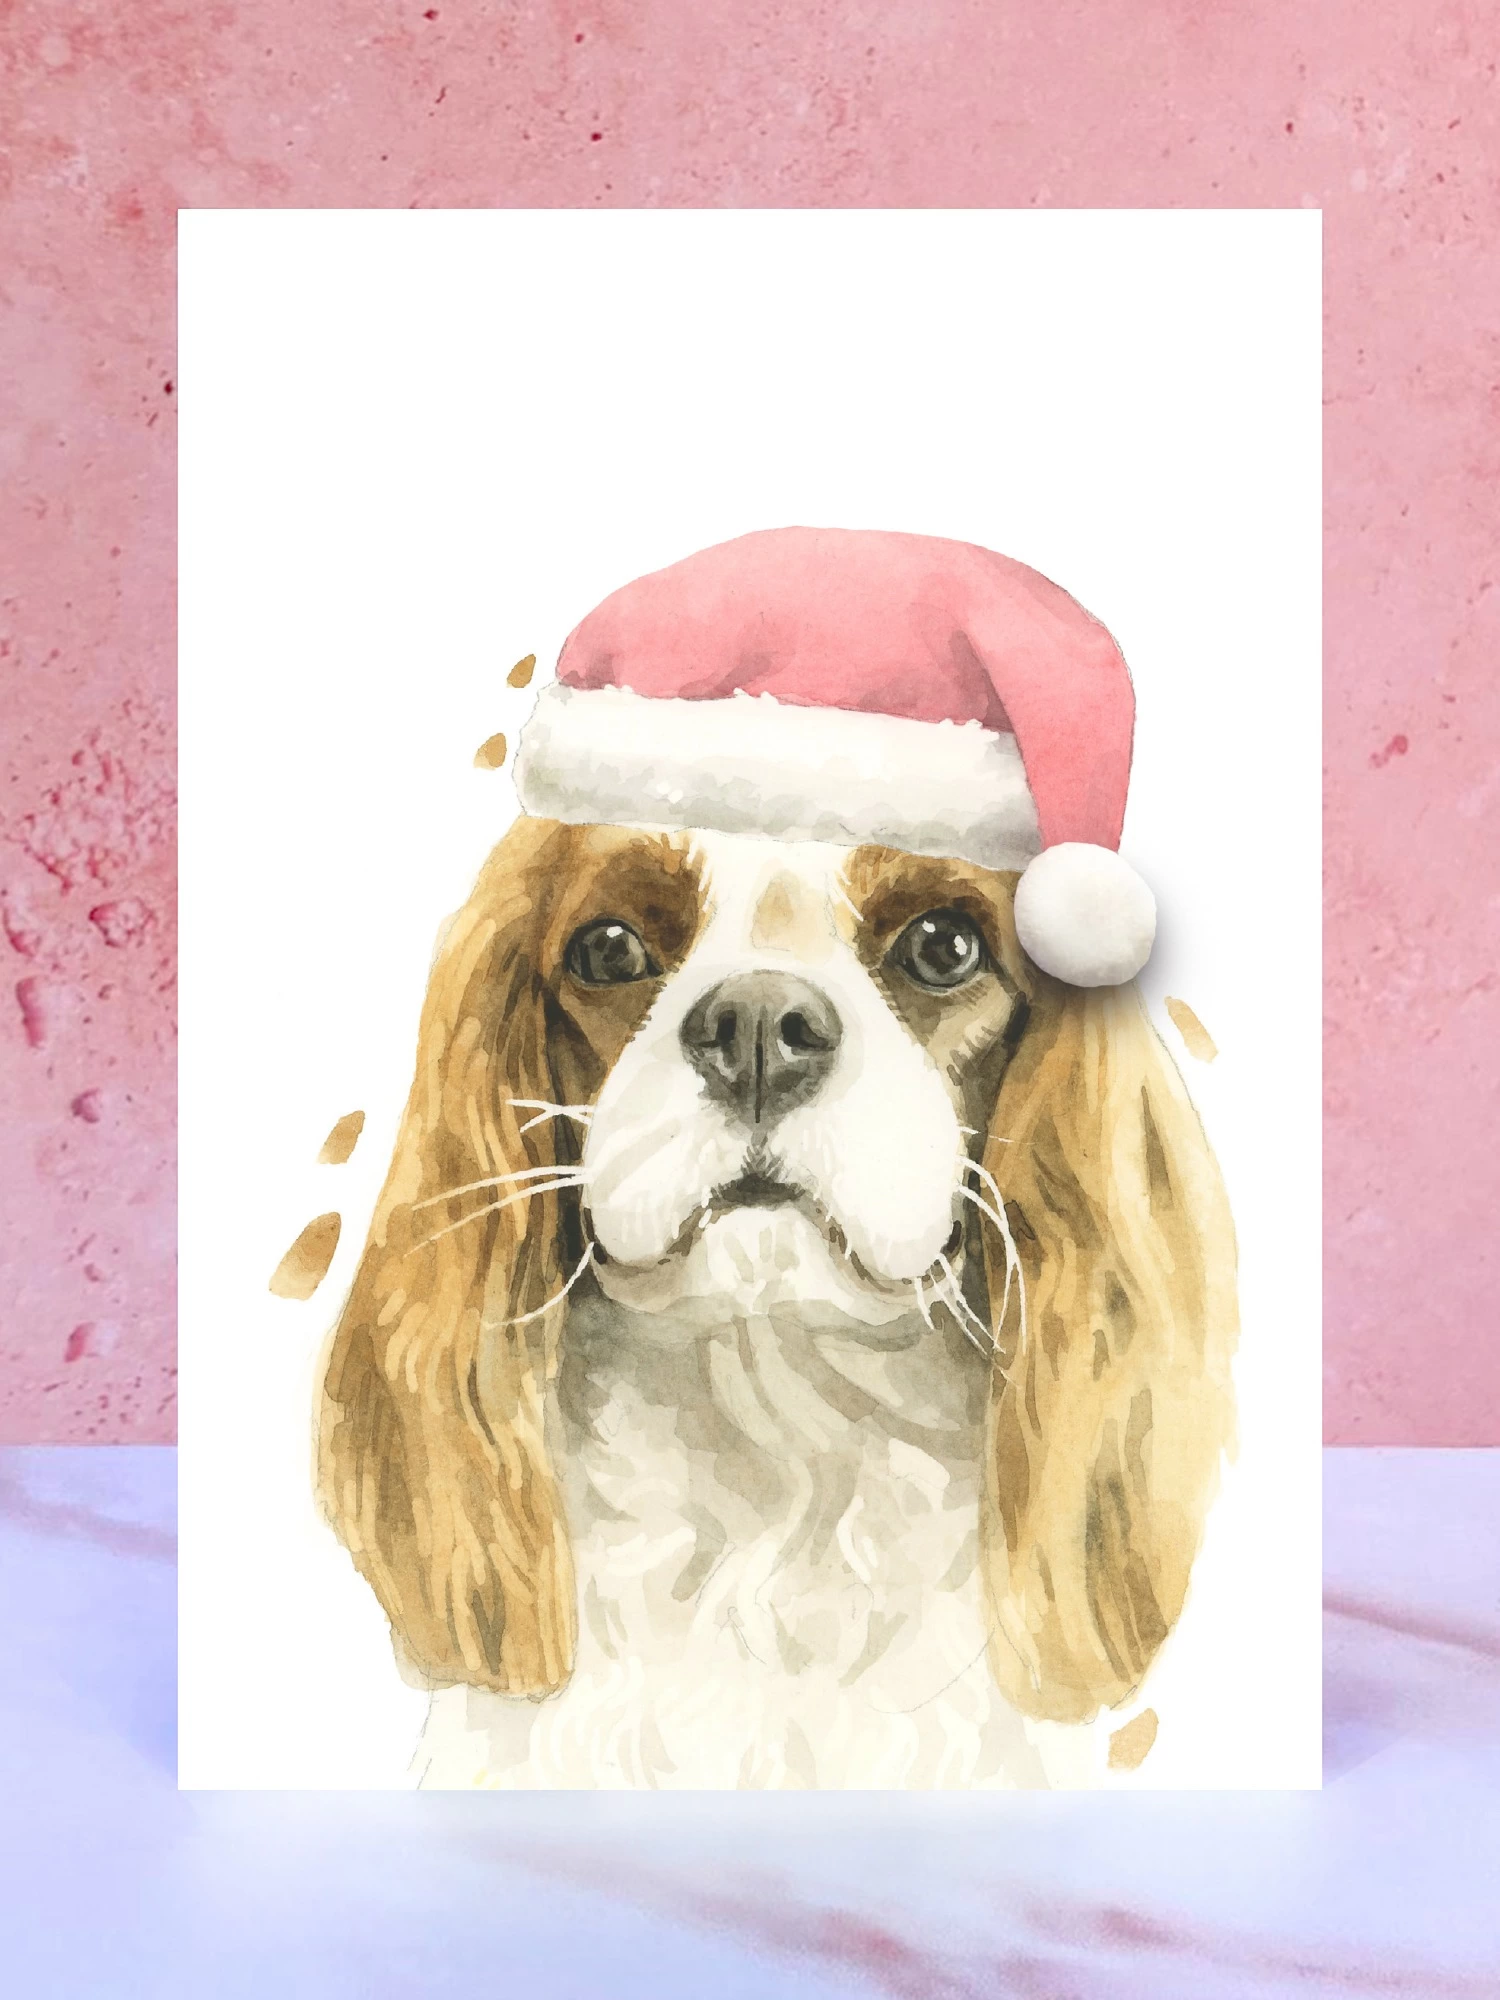 A Christmas card featuring a hand painted design of a cavalier king charles spaniel, stood upright on a marble surface surrounded by pompoms. 